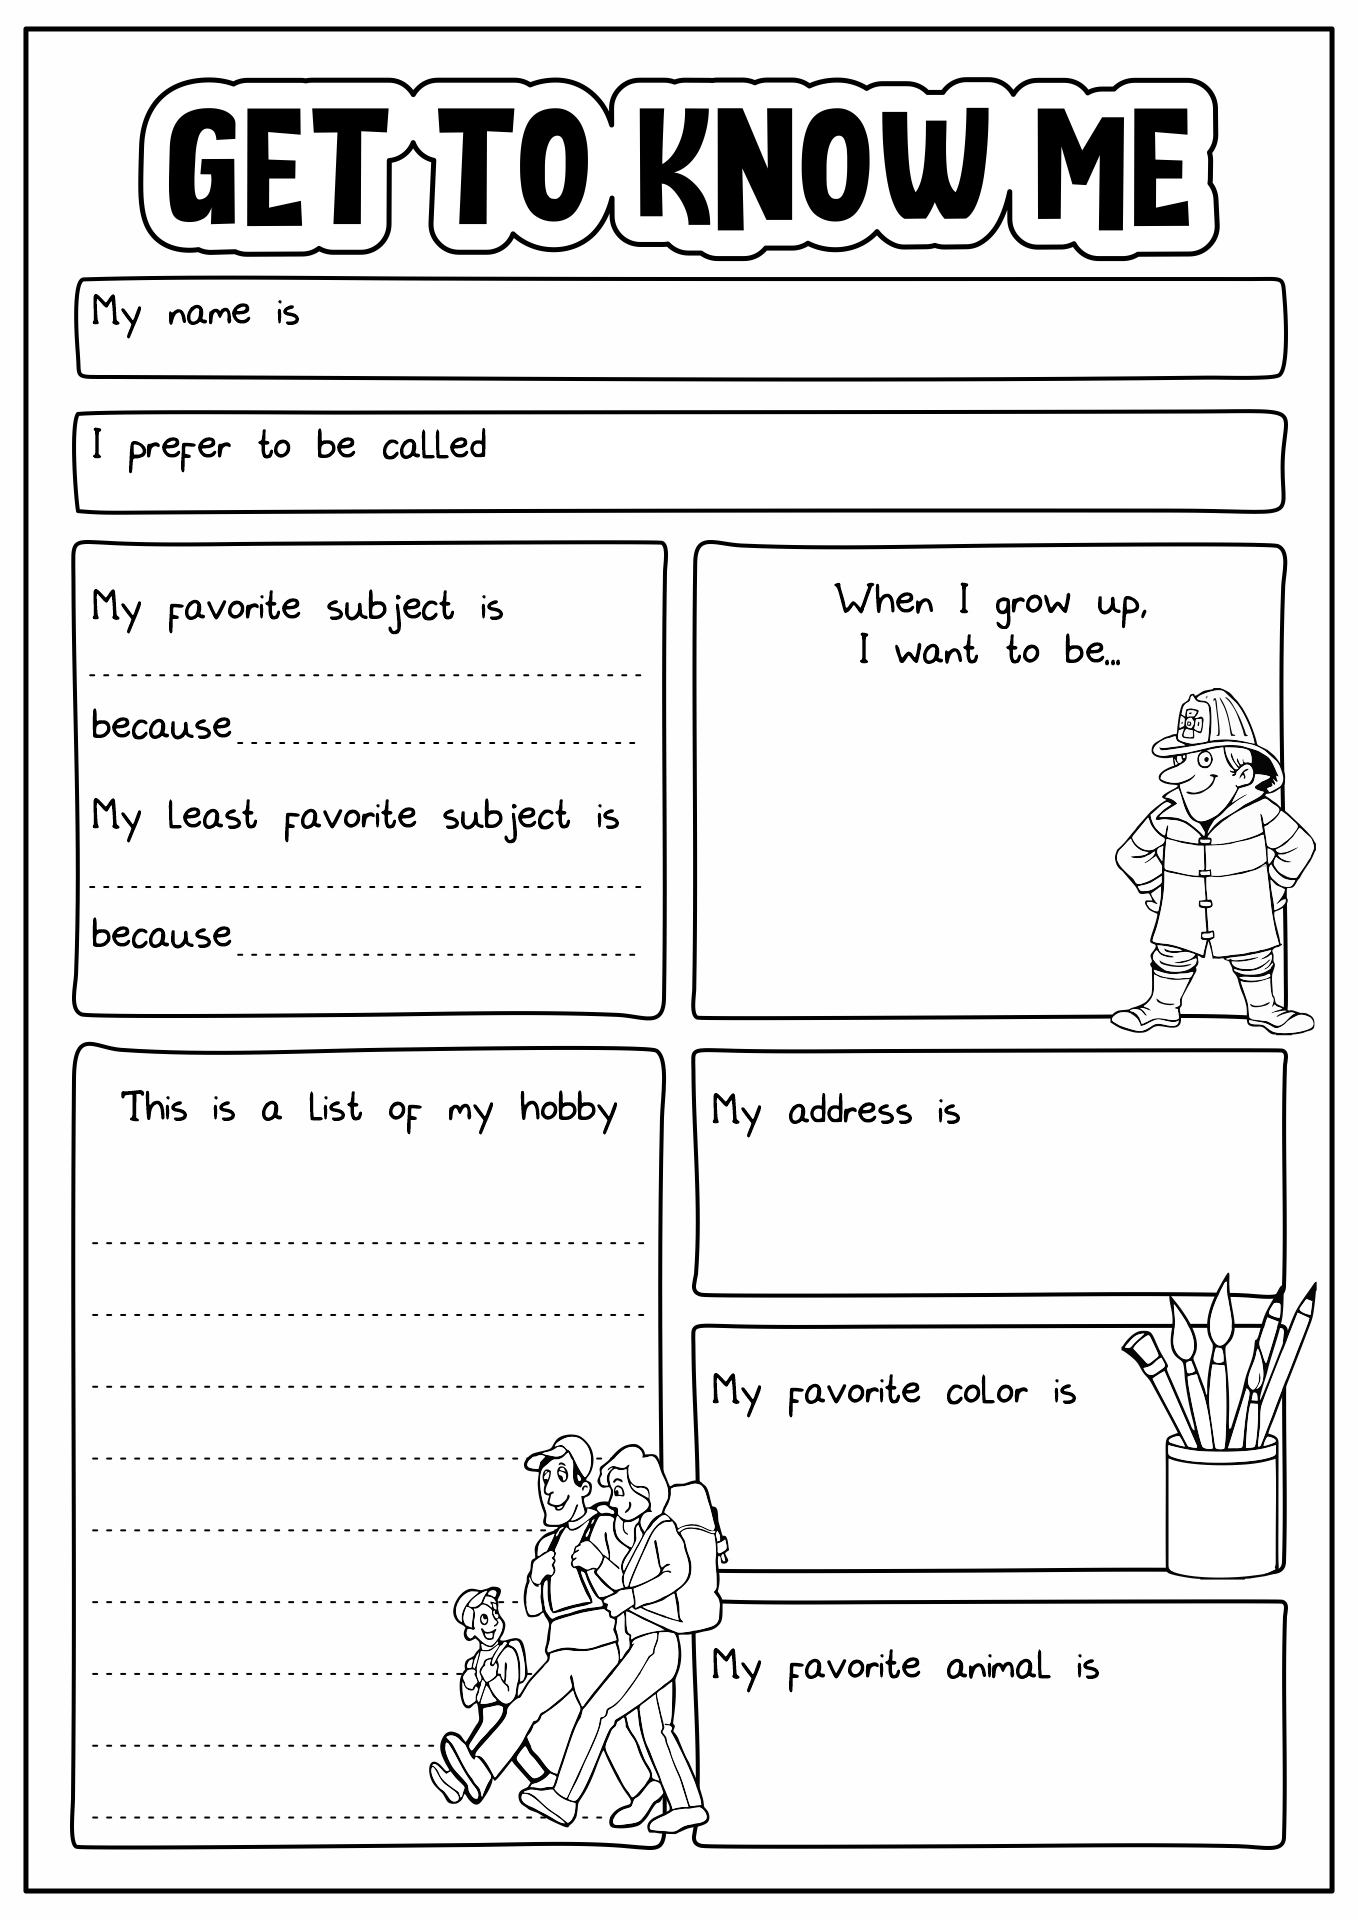 All About Me Printable Sheet Image